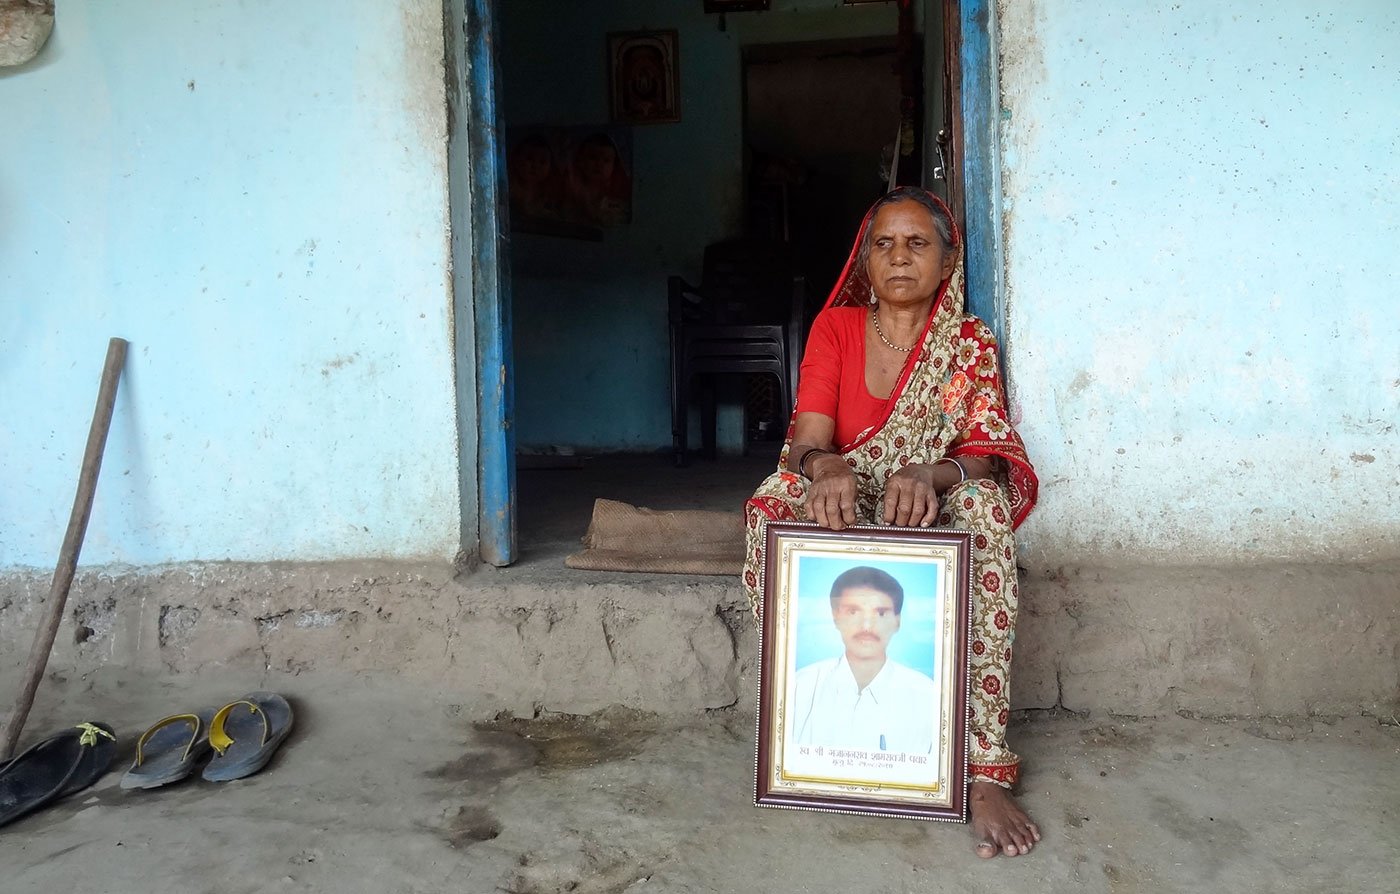 Indukala Pawar lost her husband Shyamrao early this year, but she says he died in tension after the couple lost their elder son Gajanan (framed photo) last year in T1’s attack in Sarati